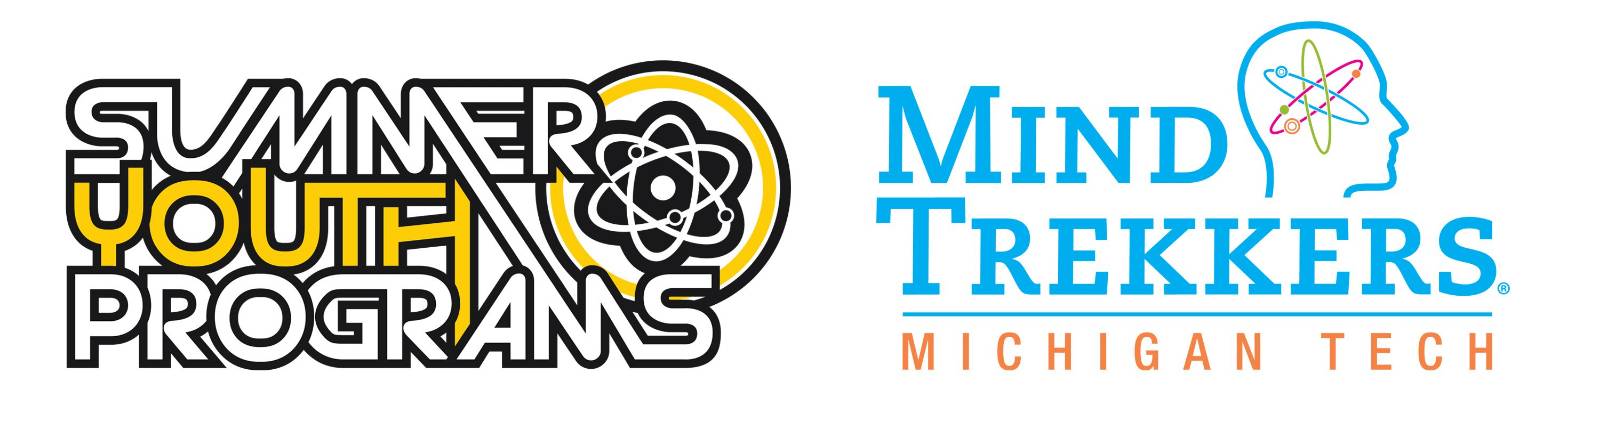 Two logos: Summer Youth Programs and Mind Trekkers